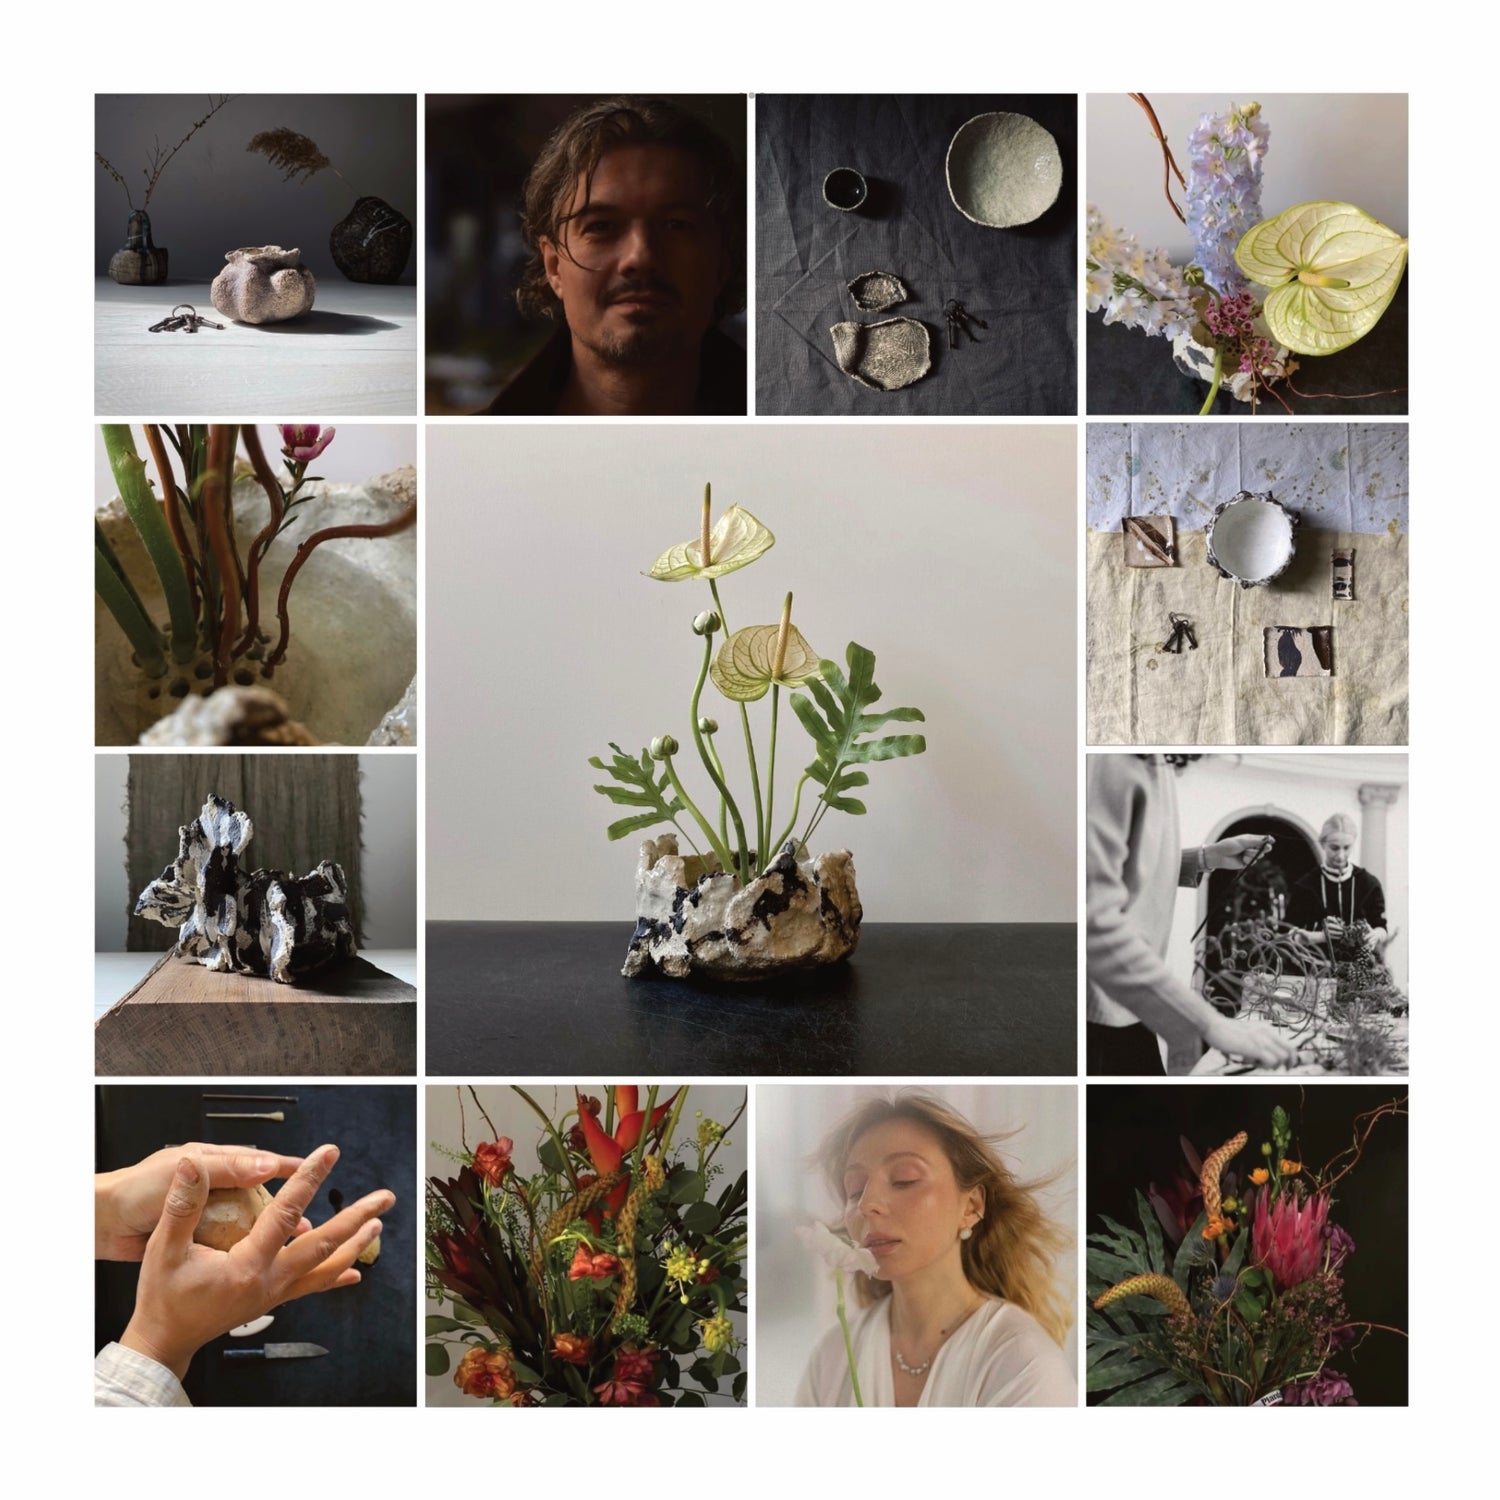 Collage of ceramic and floral art with people. The central image features a unique flower arrangement in a ceramic vase. The theme emphasizes creative processes and artistic expressions.